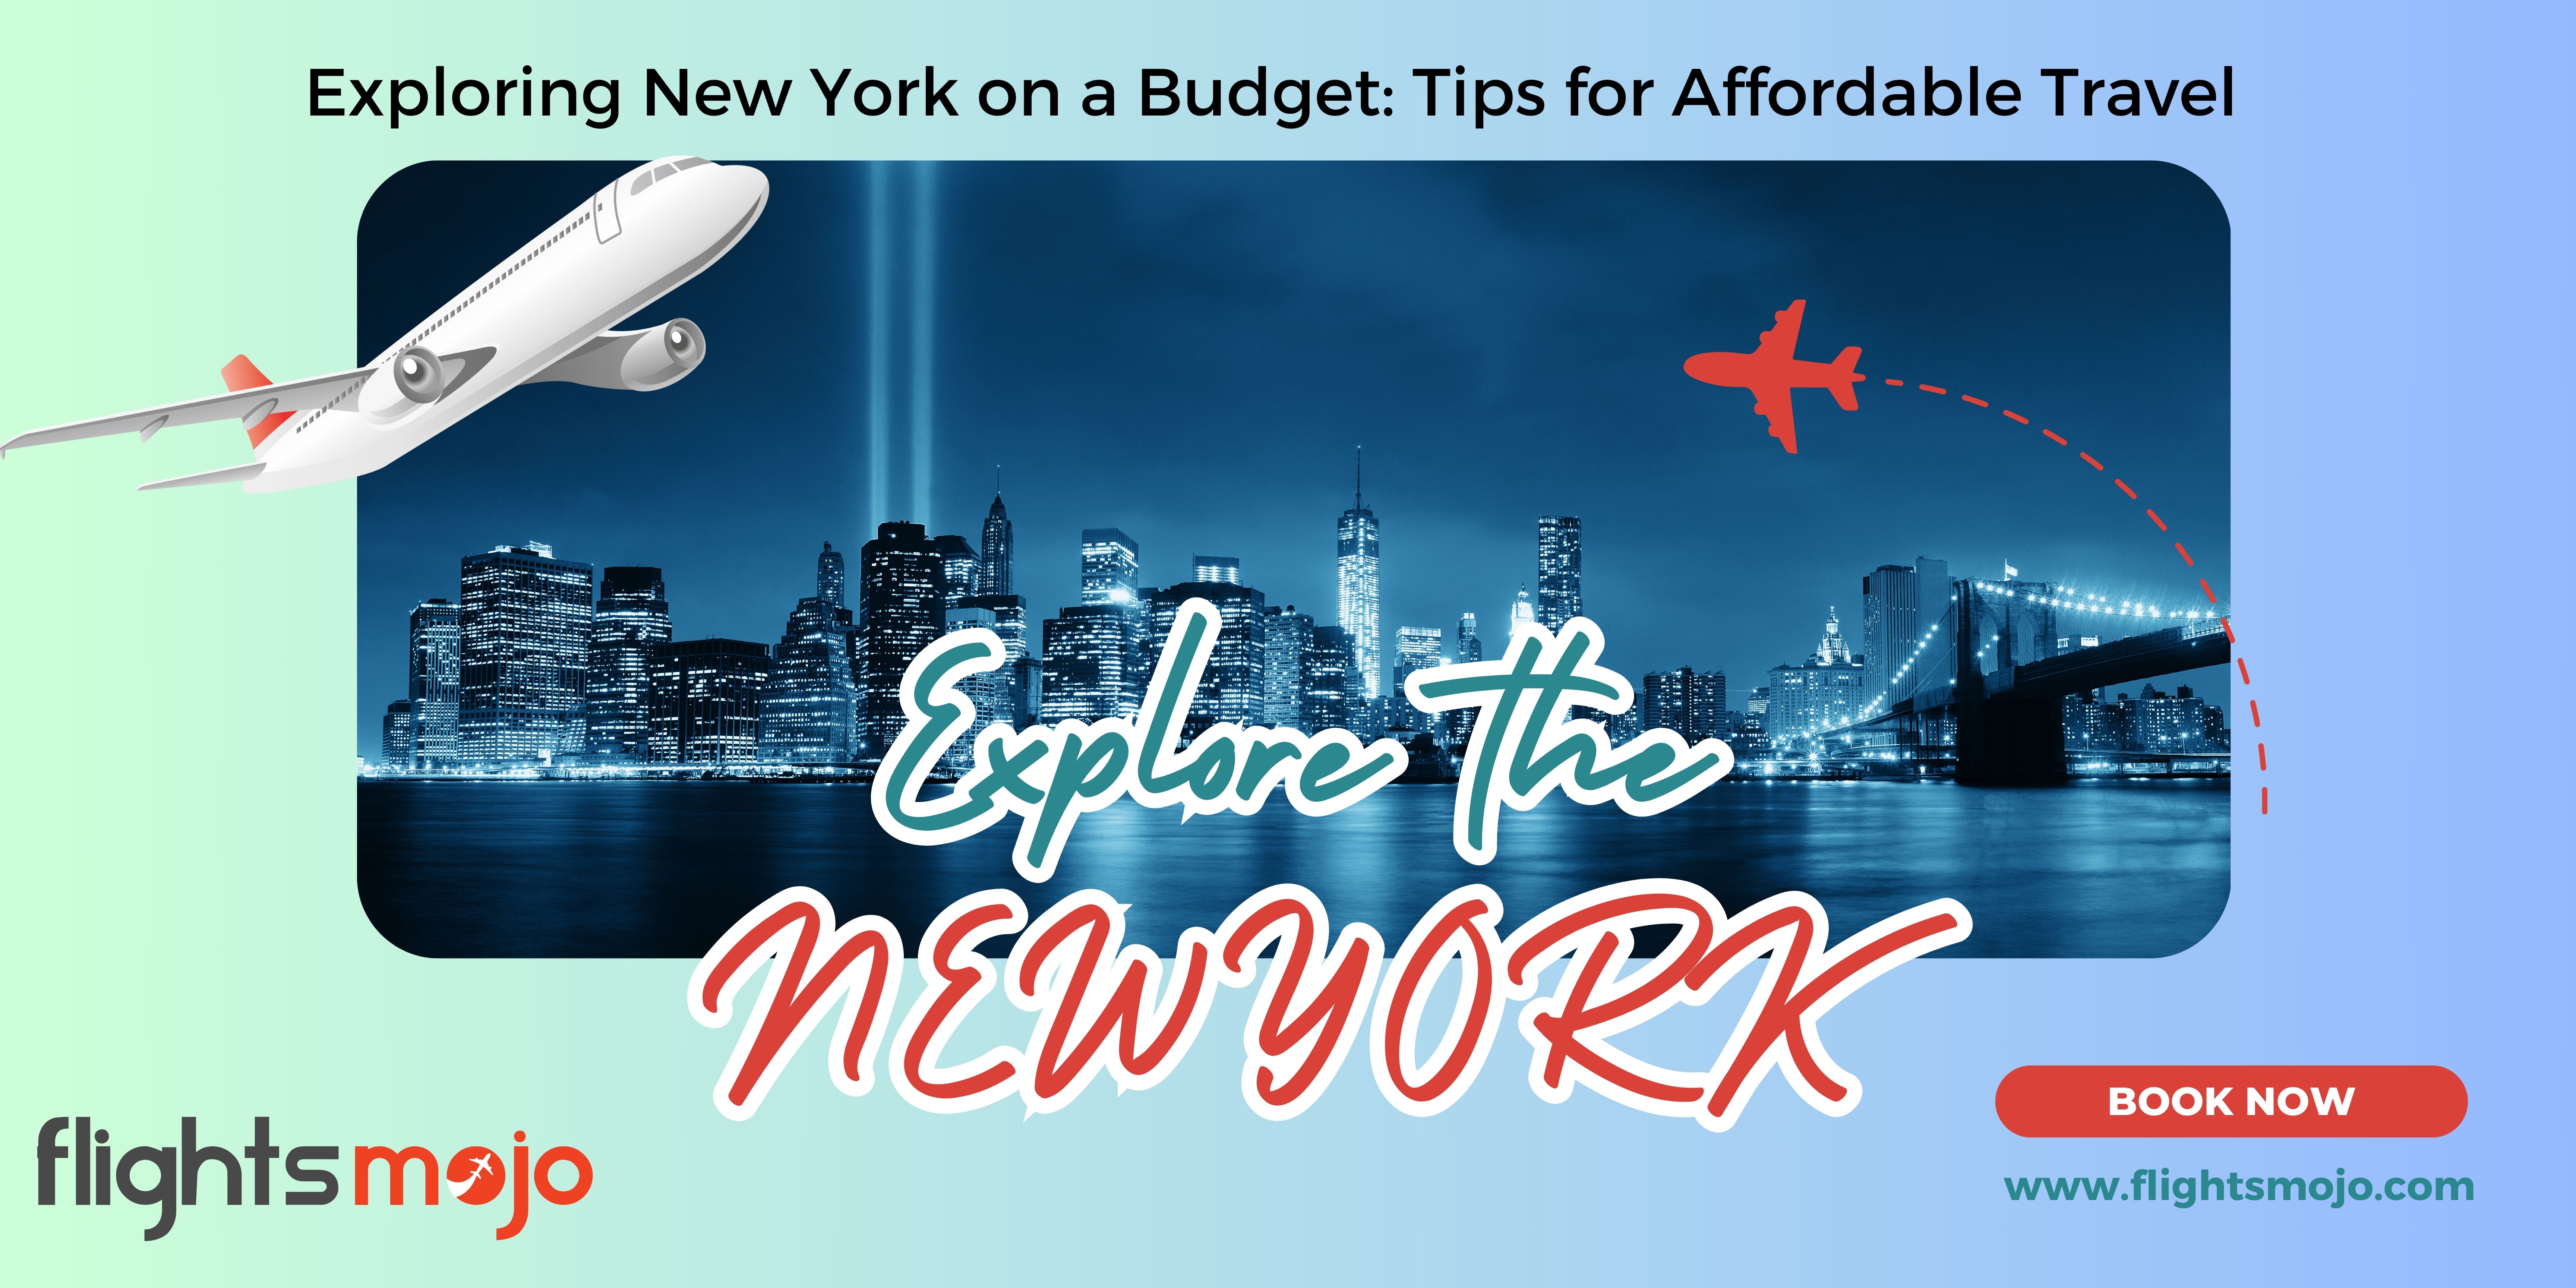 Exploring New York on a Budget: Tips for Affordable Travel – Get Last Minute Flights Tickets at low Price